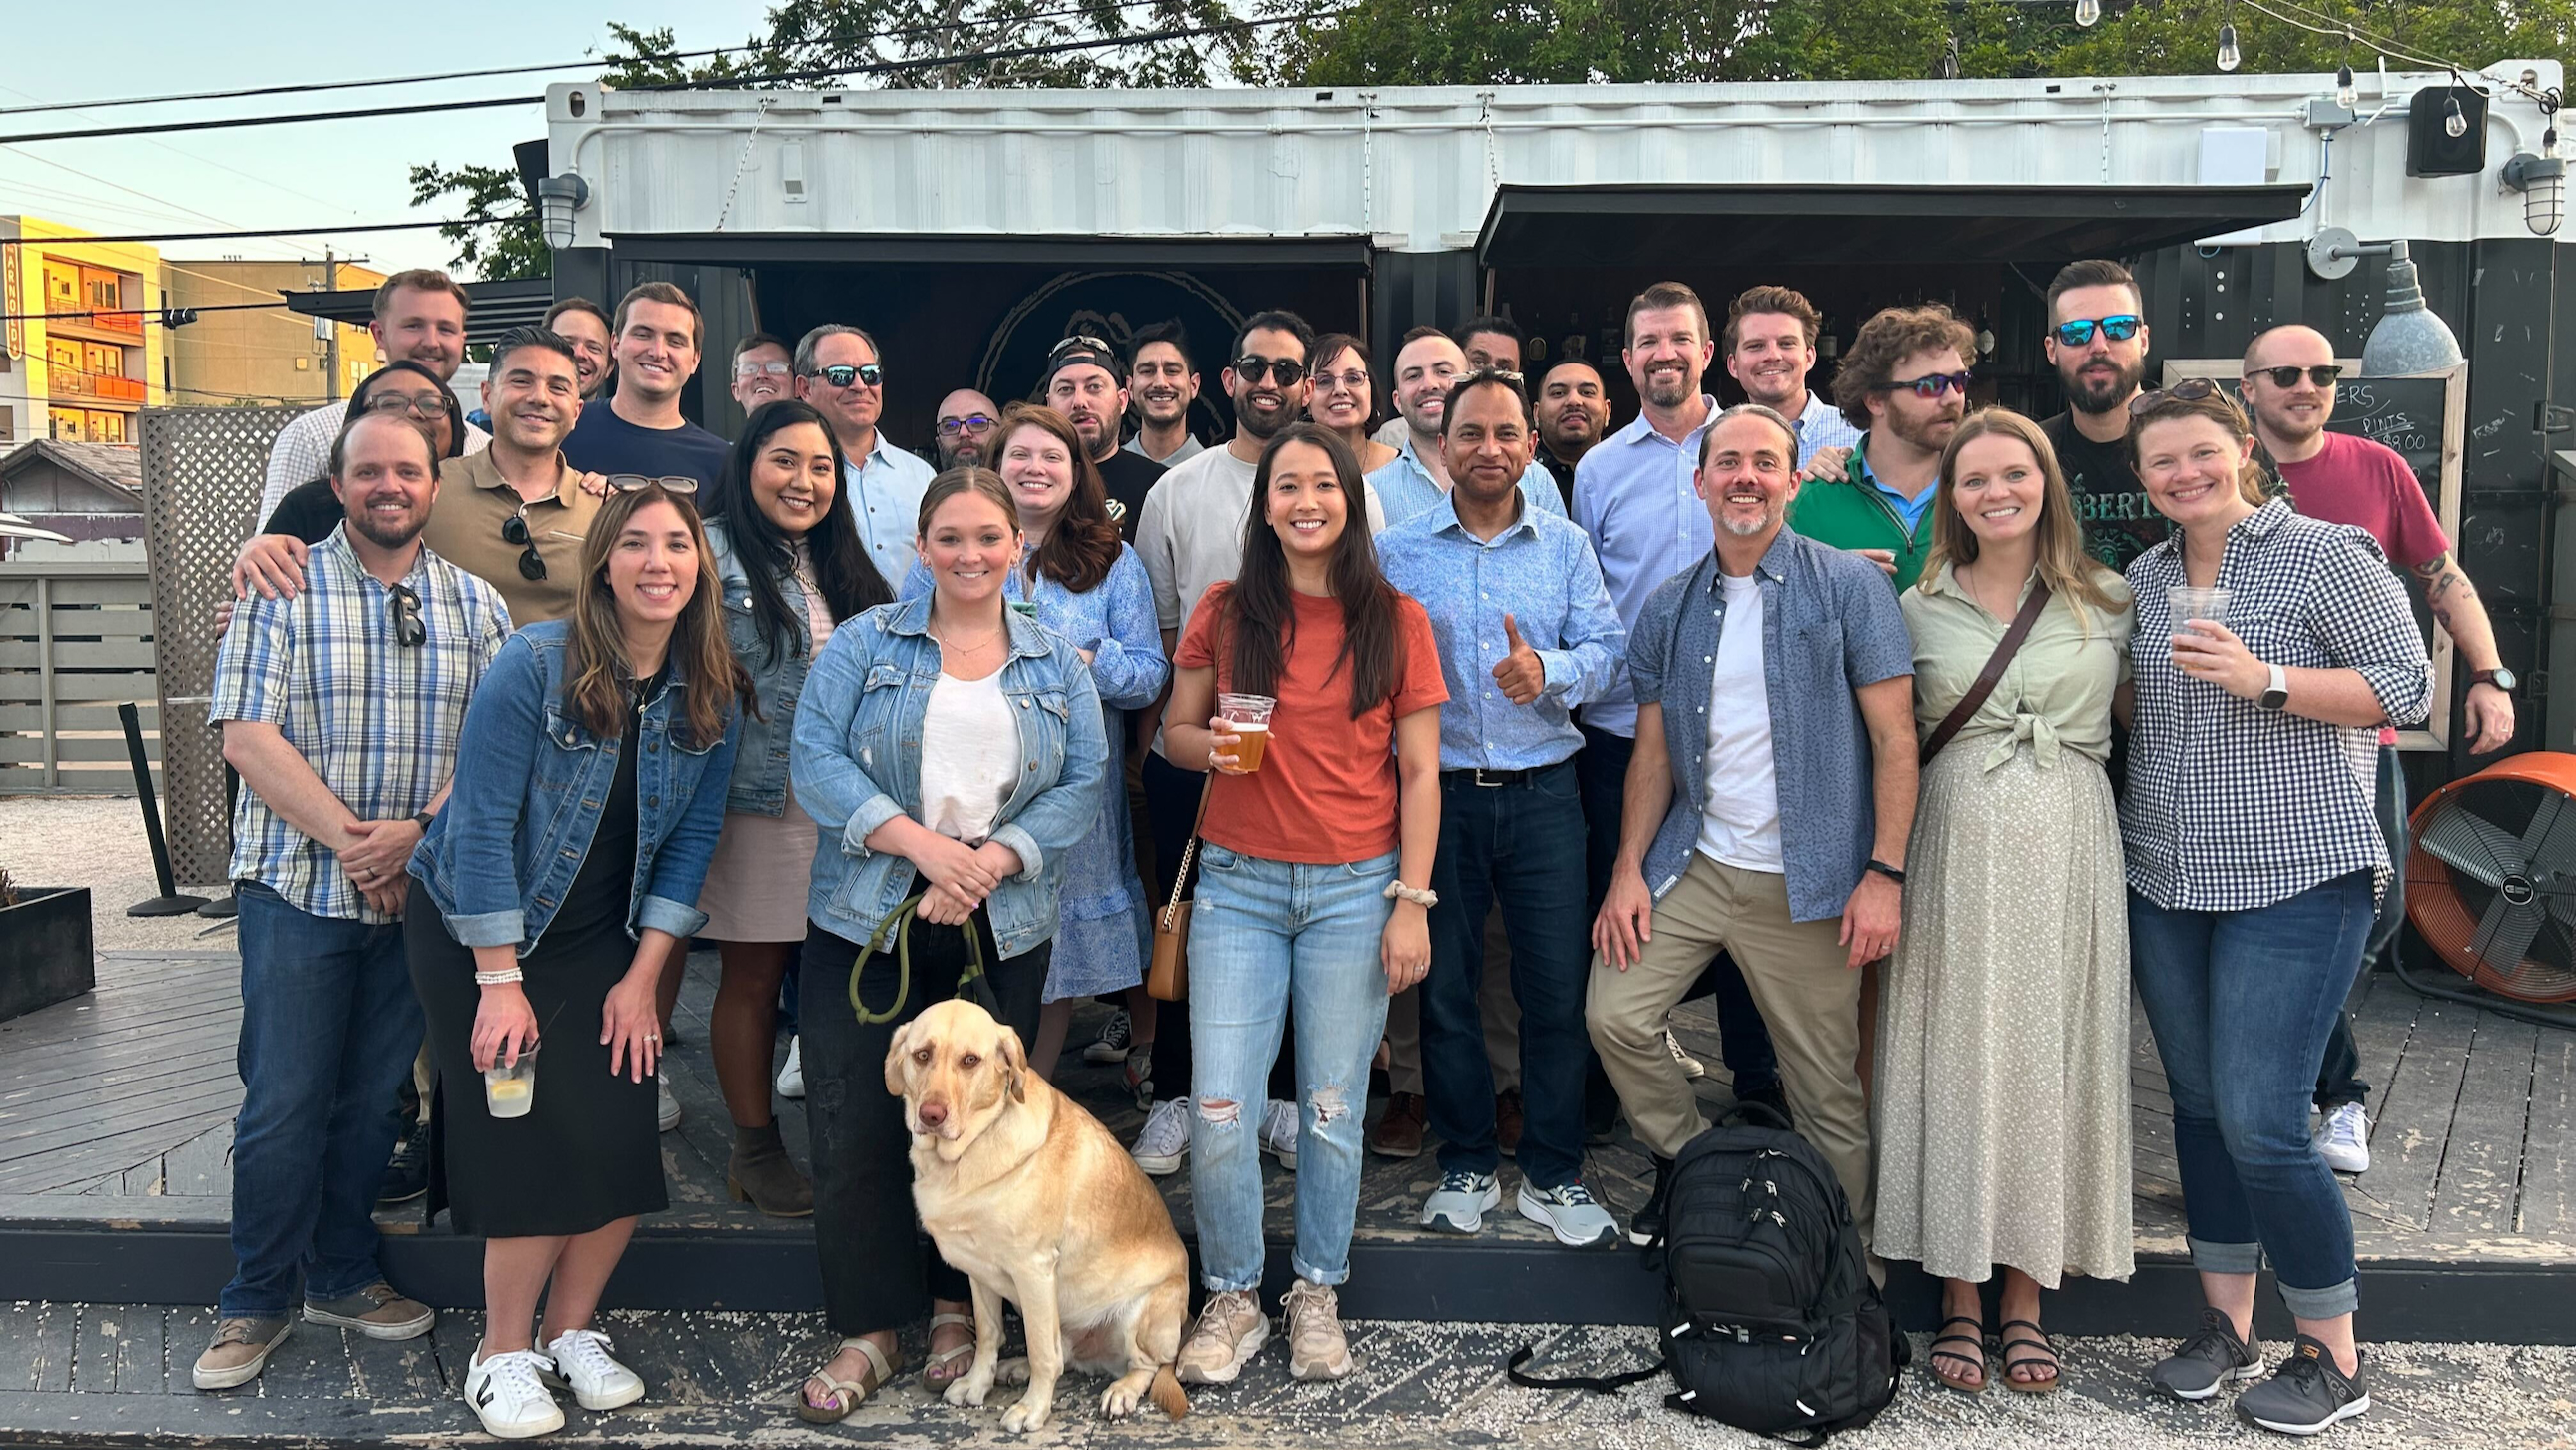 Large group photo of Redgate team members outside, with a dog in front. 